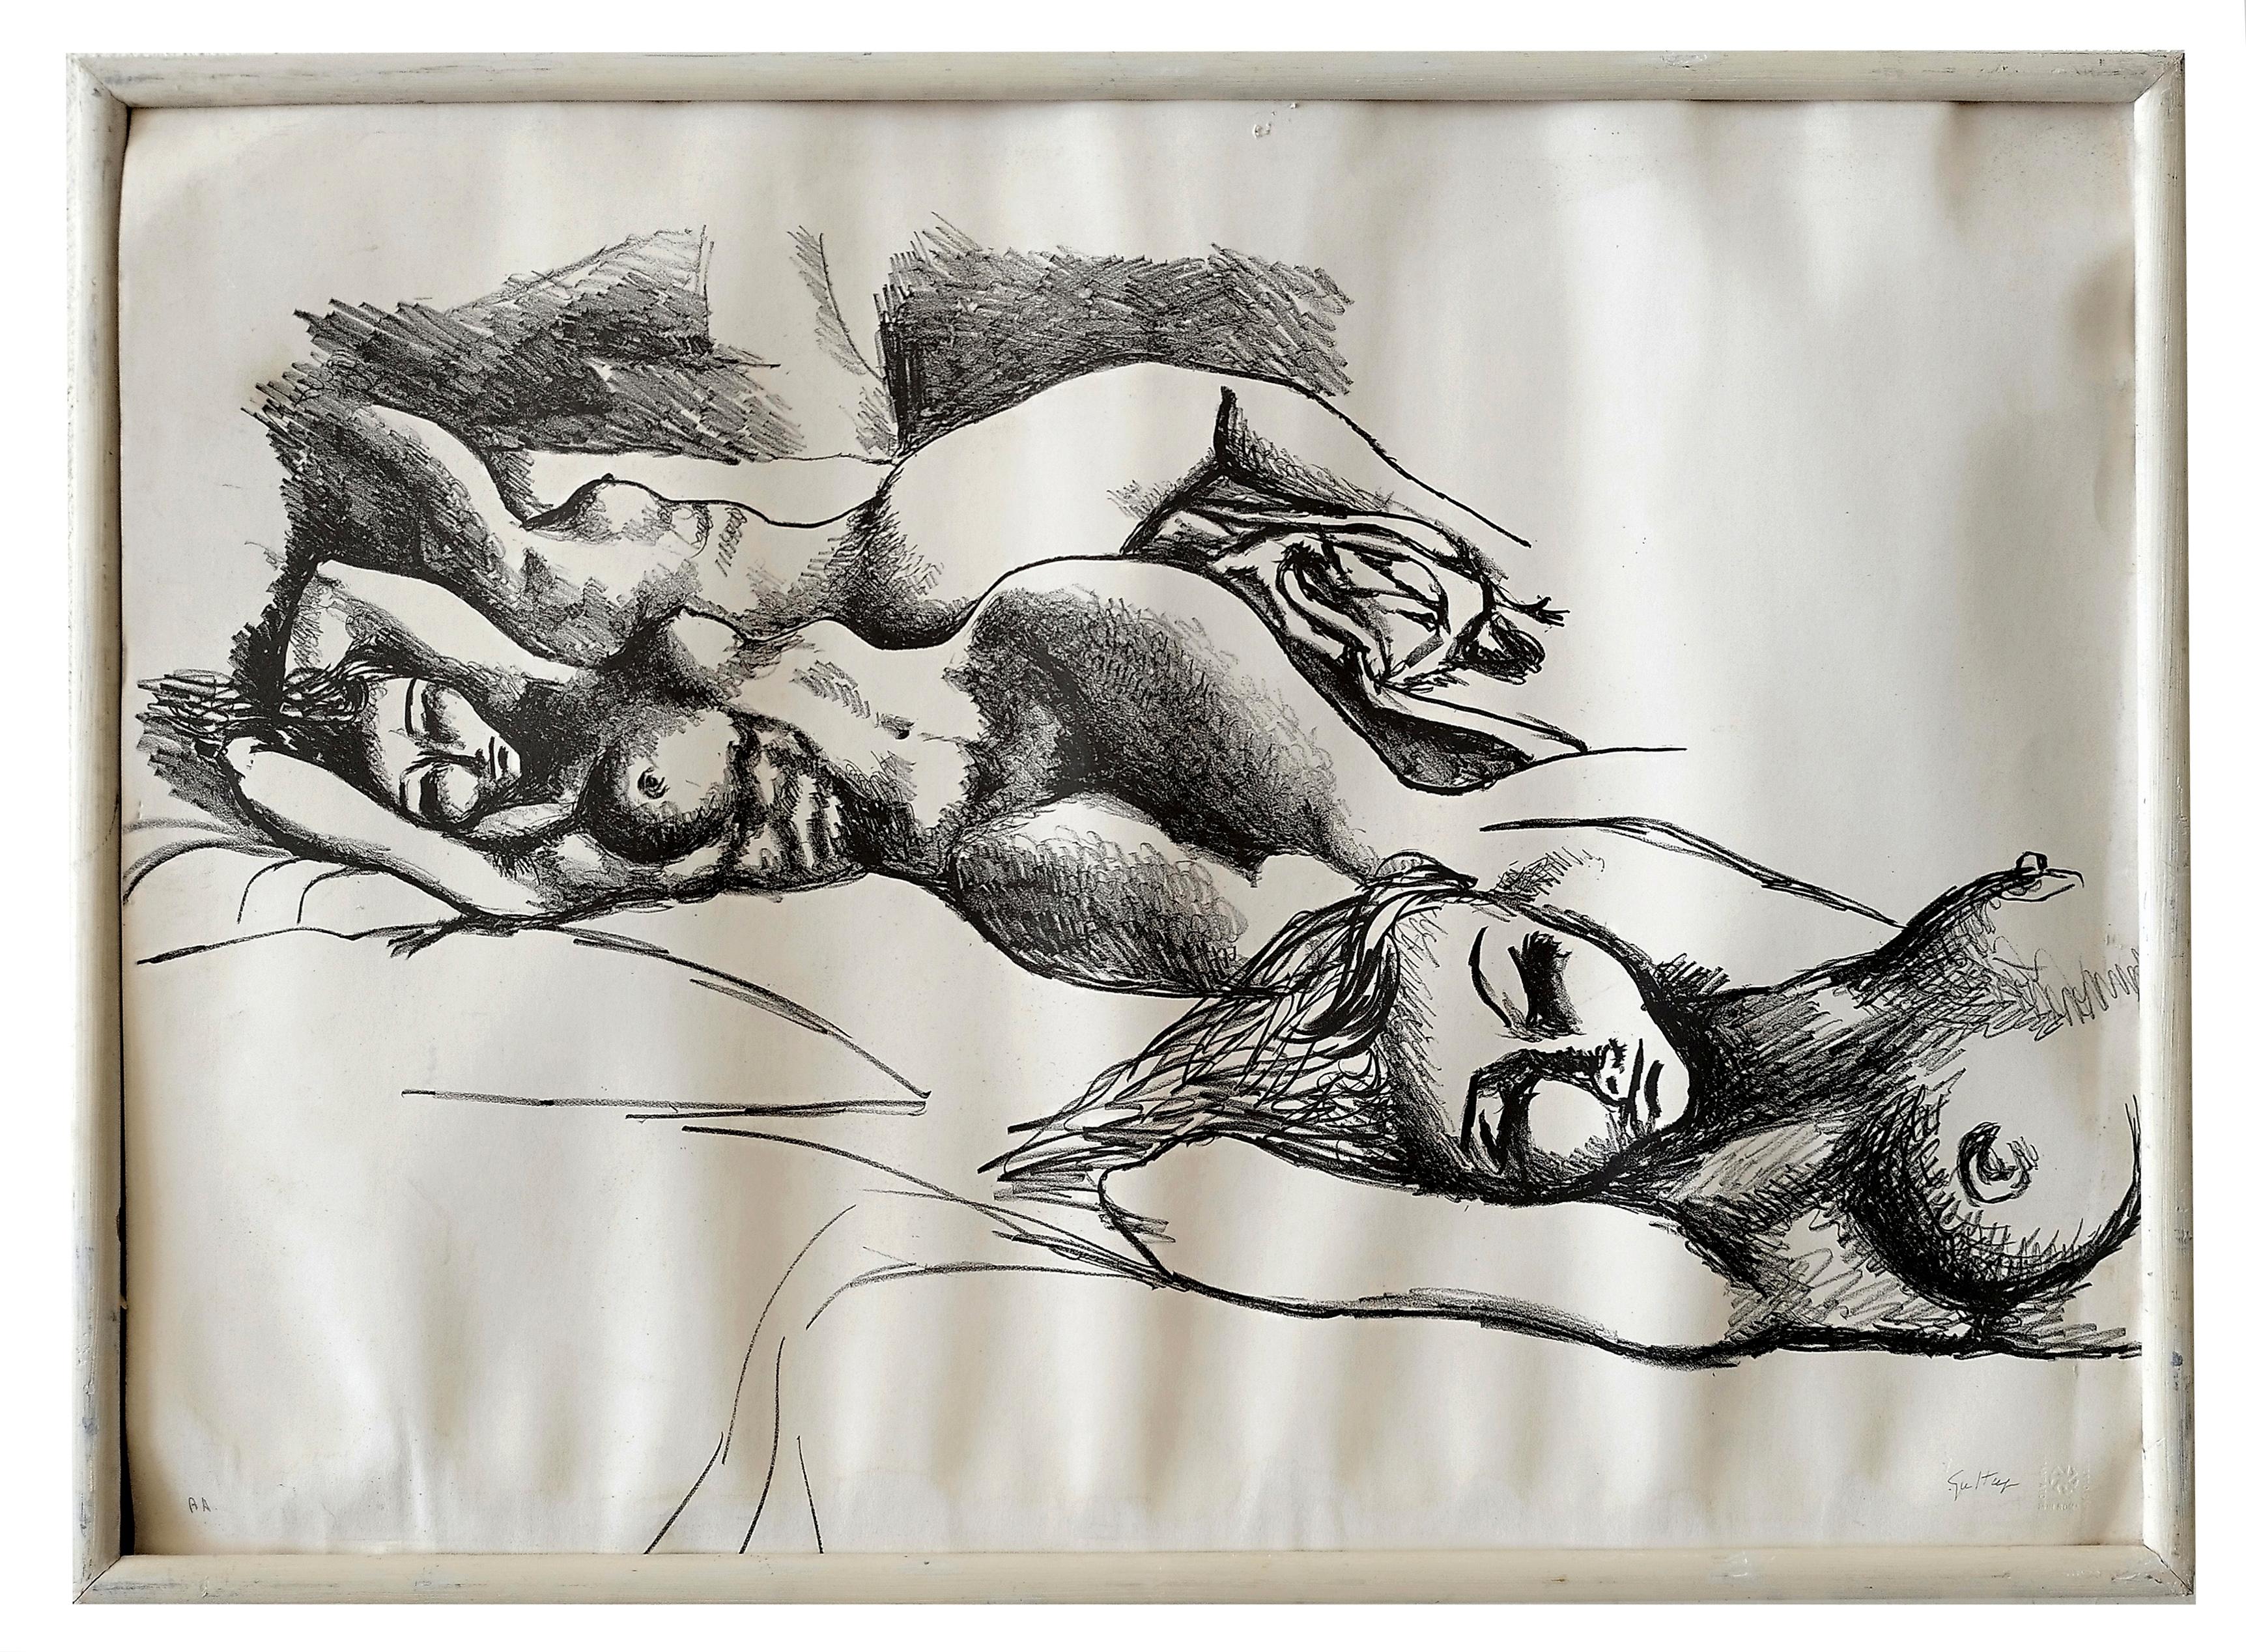 Renato Guttuso Nude Print - DISTENT NUDO - Lithograph on paper signed at lower right